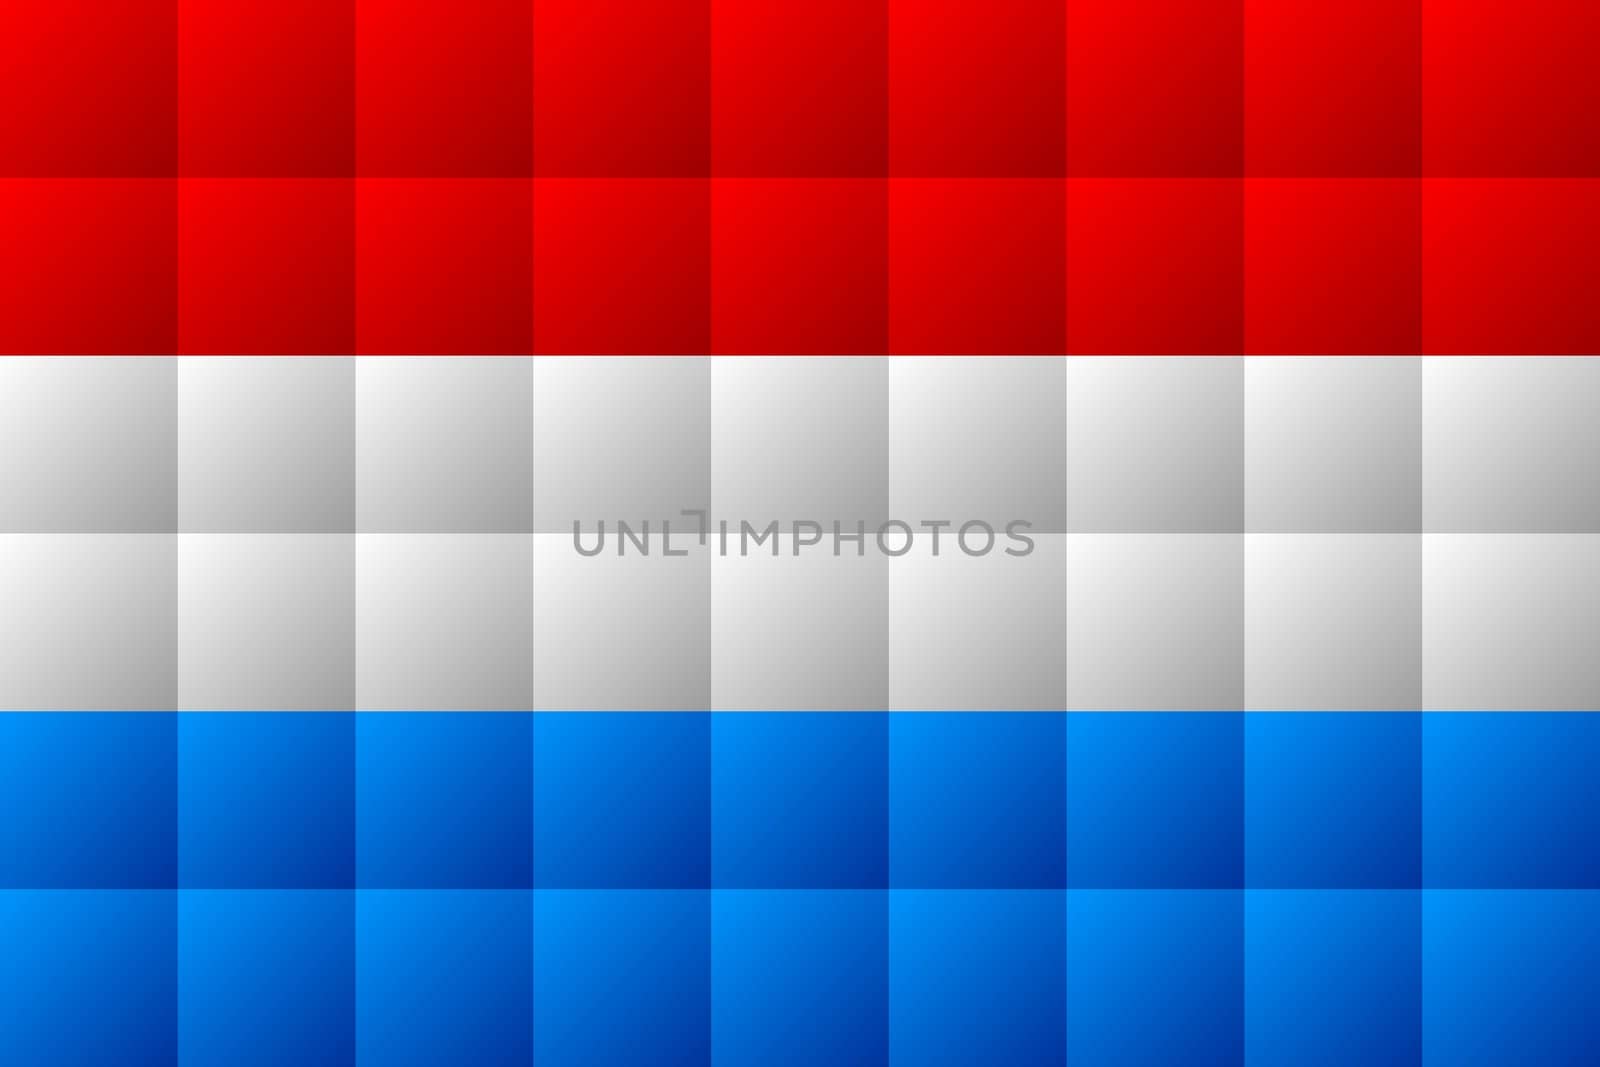 Flag of Luxembourg in red, white and blue